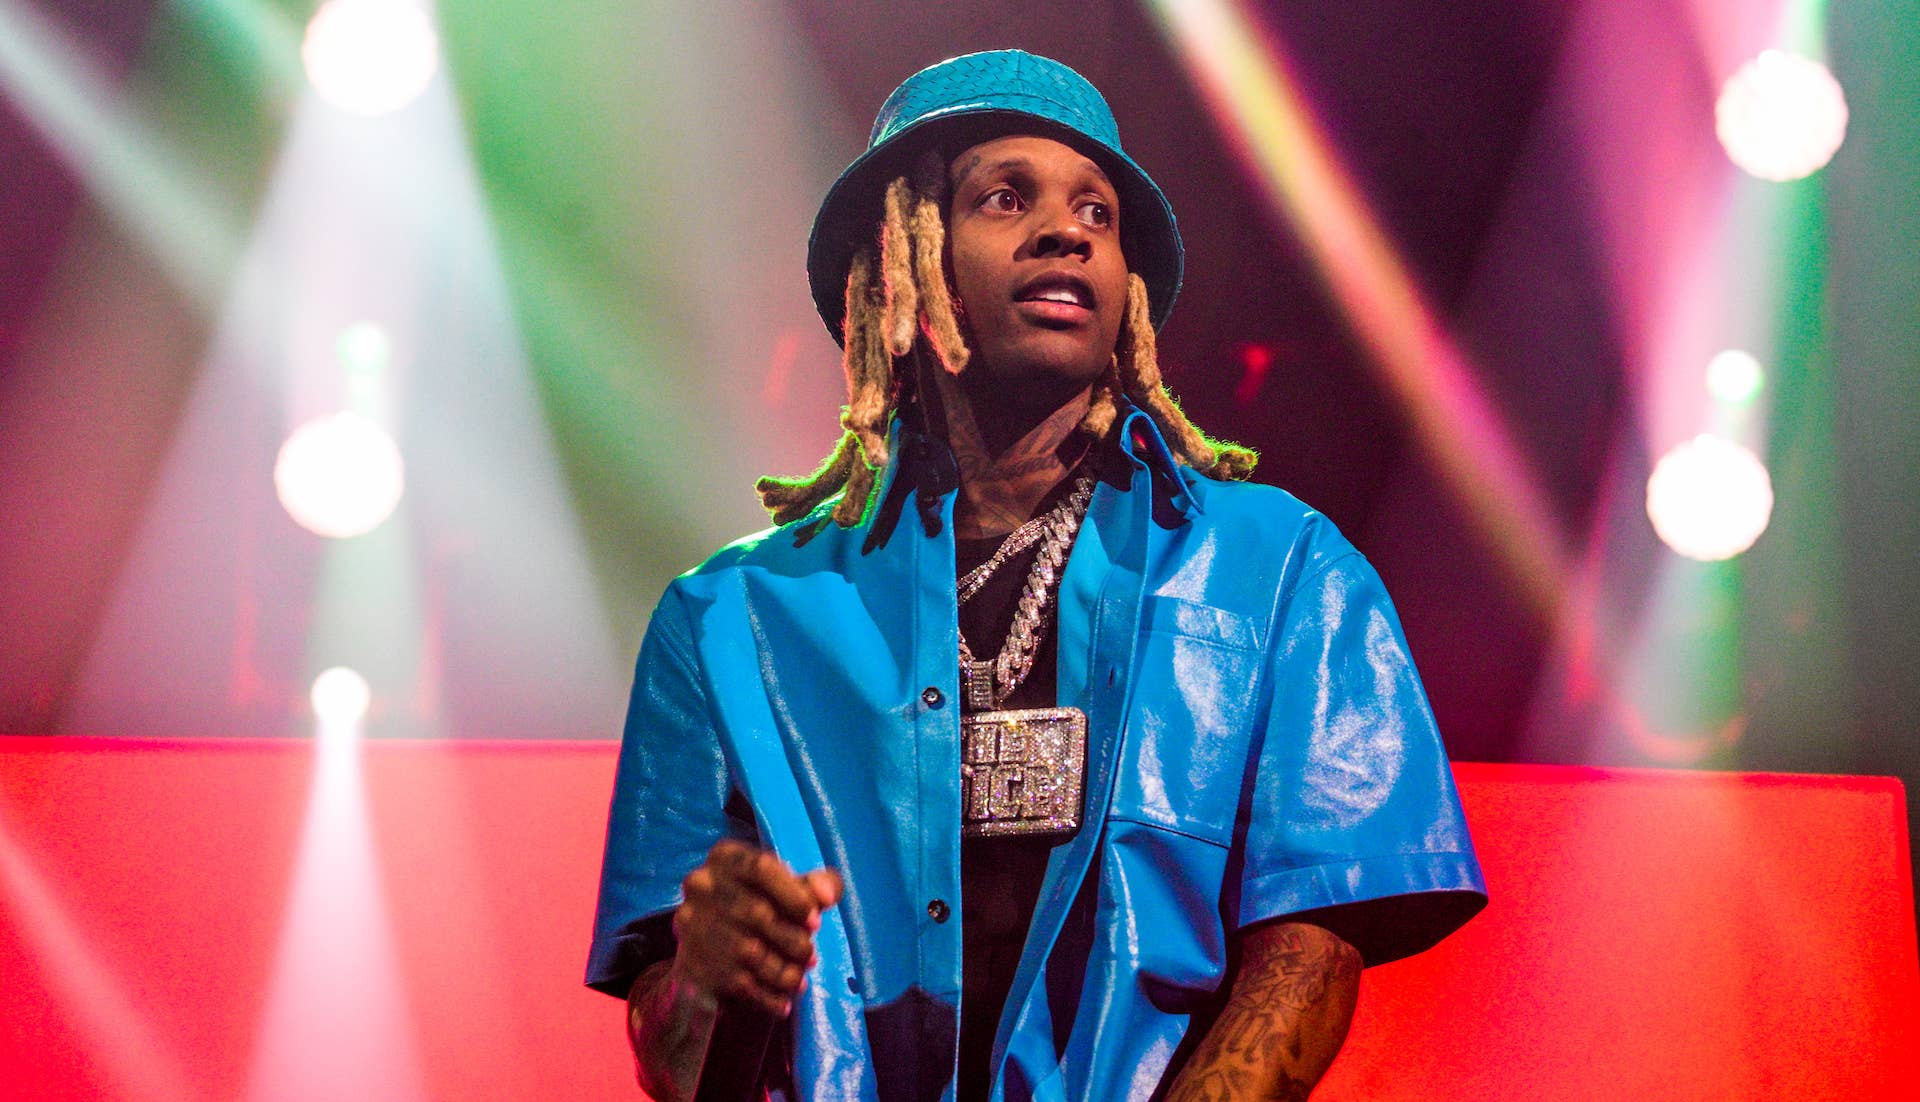 Lil Durk performs during Future's One Big Party Tour